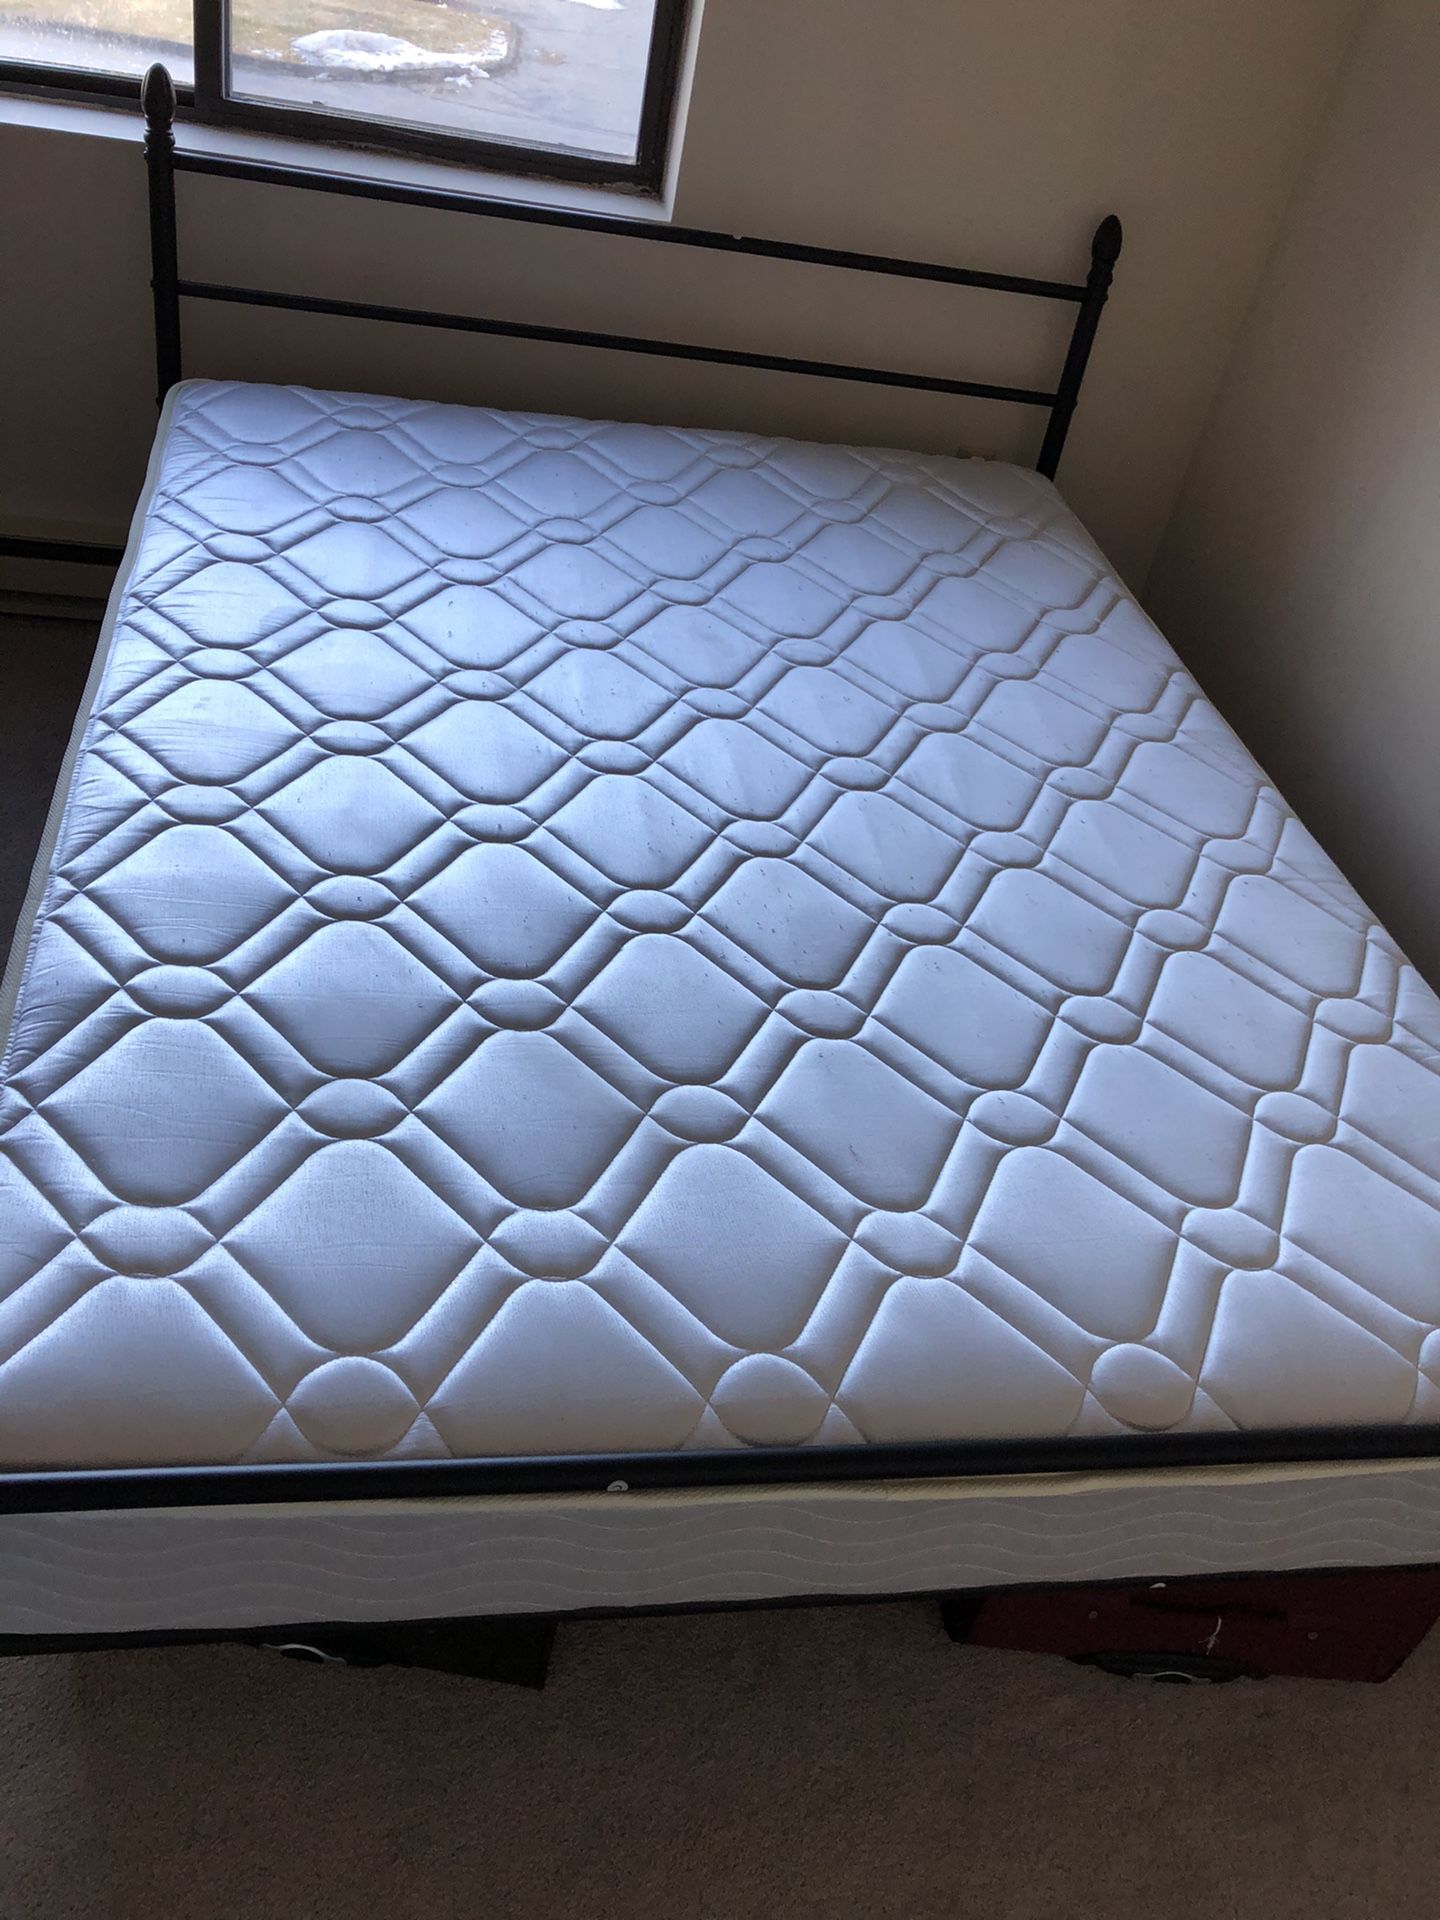 8” queen mattress with bed frame